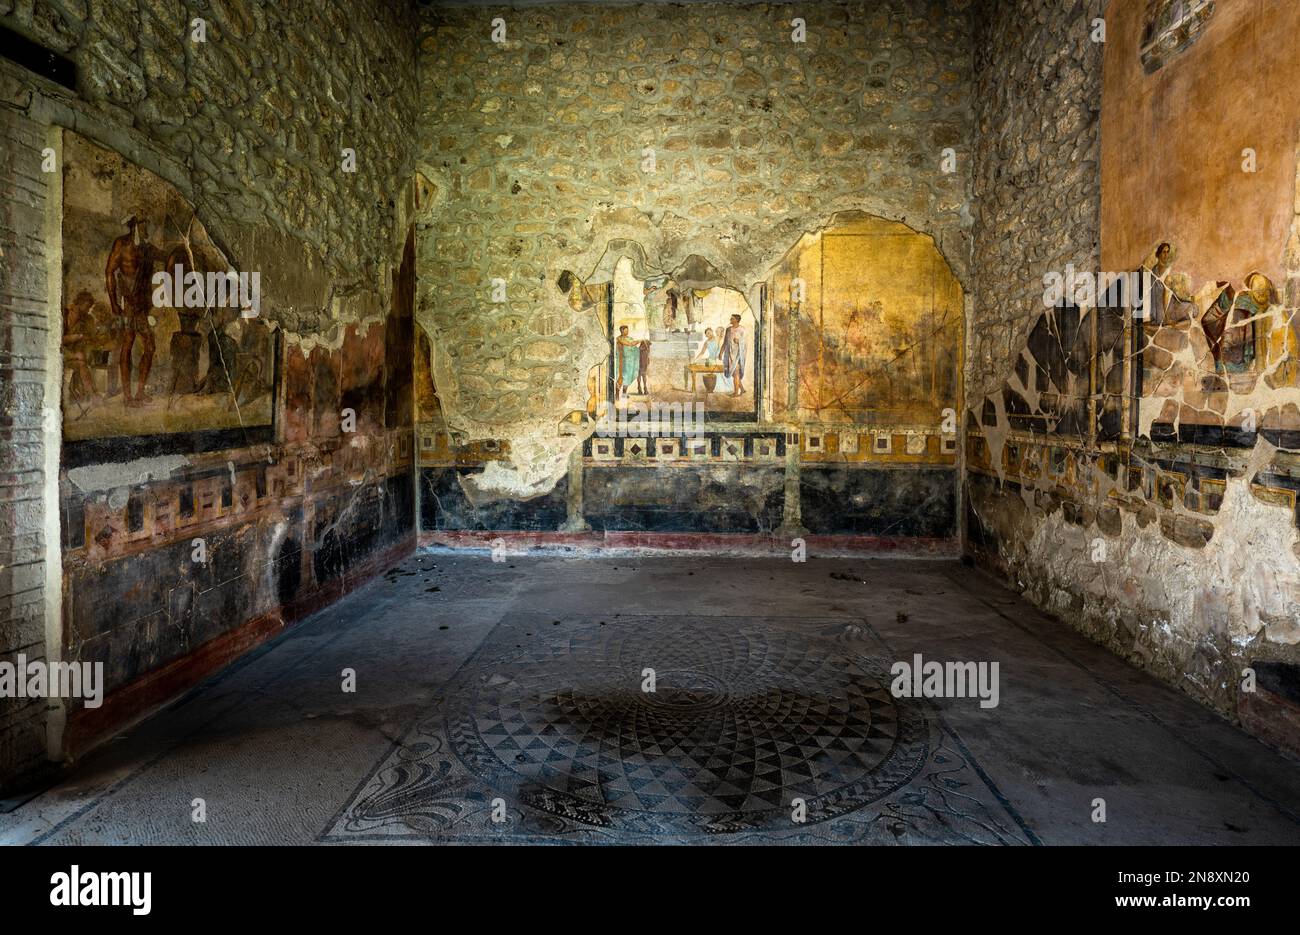 Room of well preserved frescoes and mosaics in the Casa Degli Amorini in the ruins of Pompeii Stock Photo